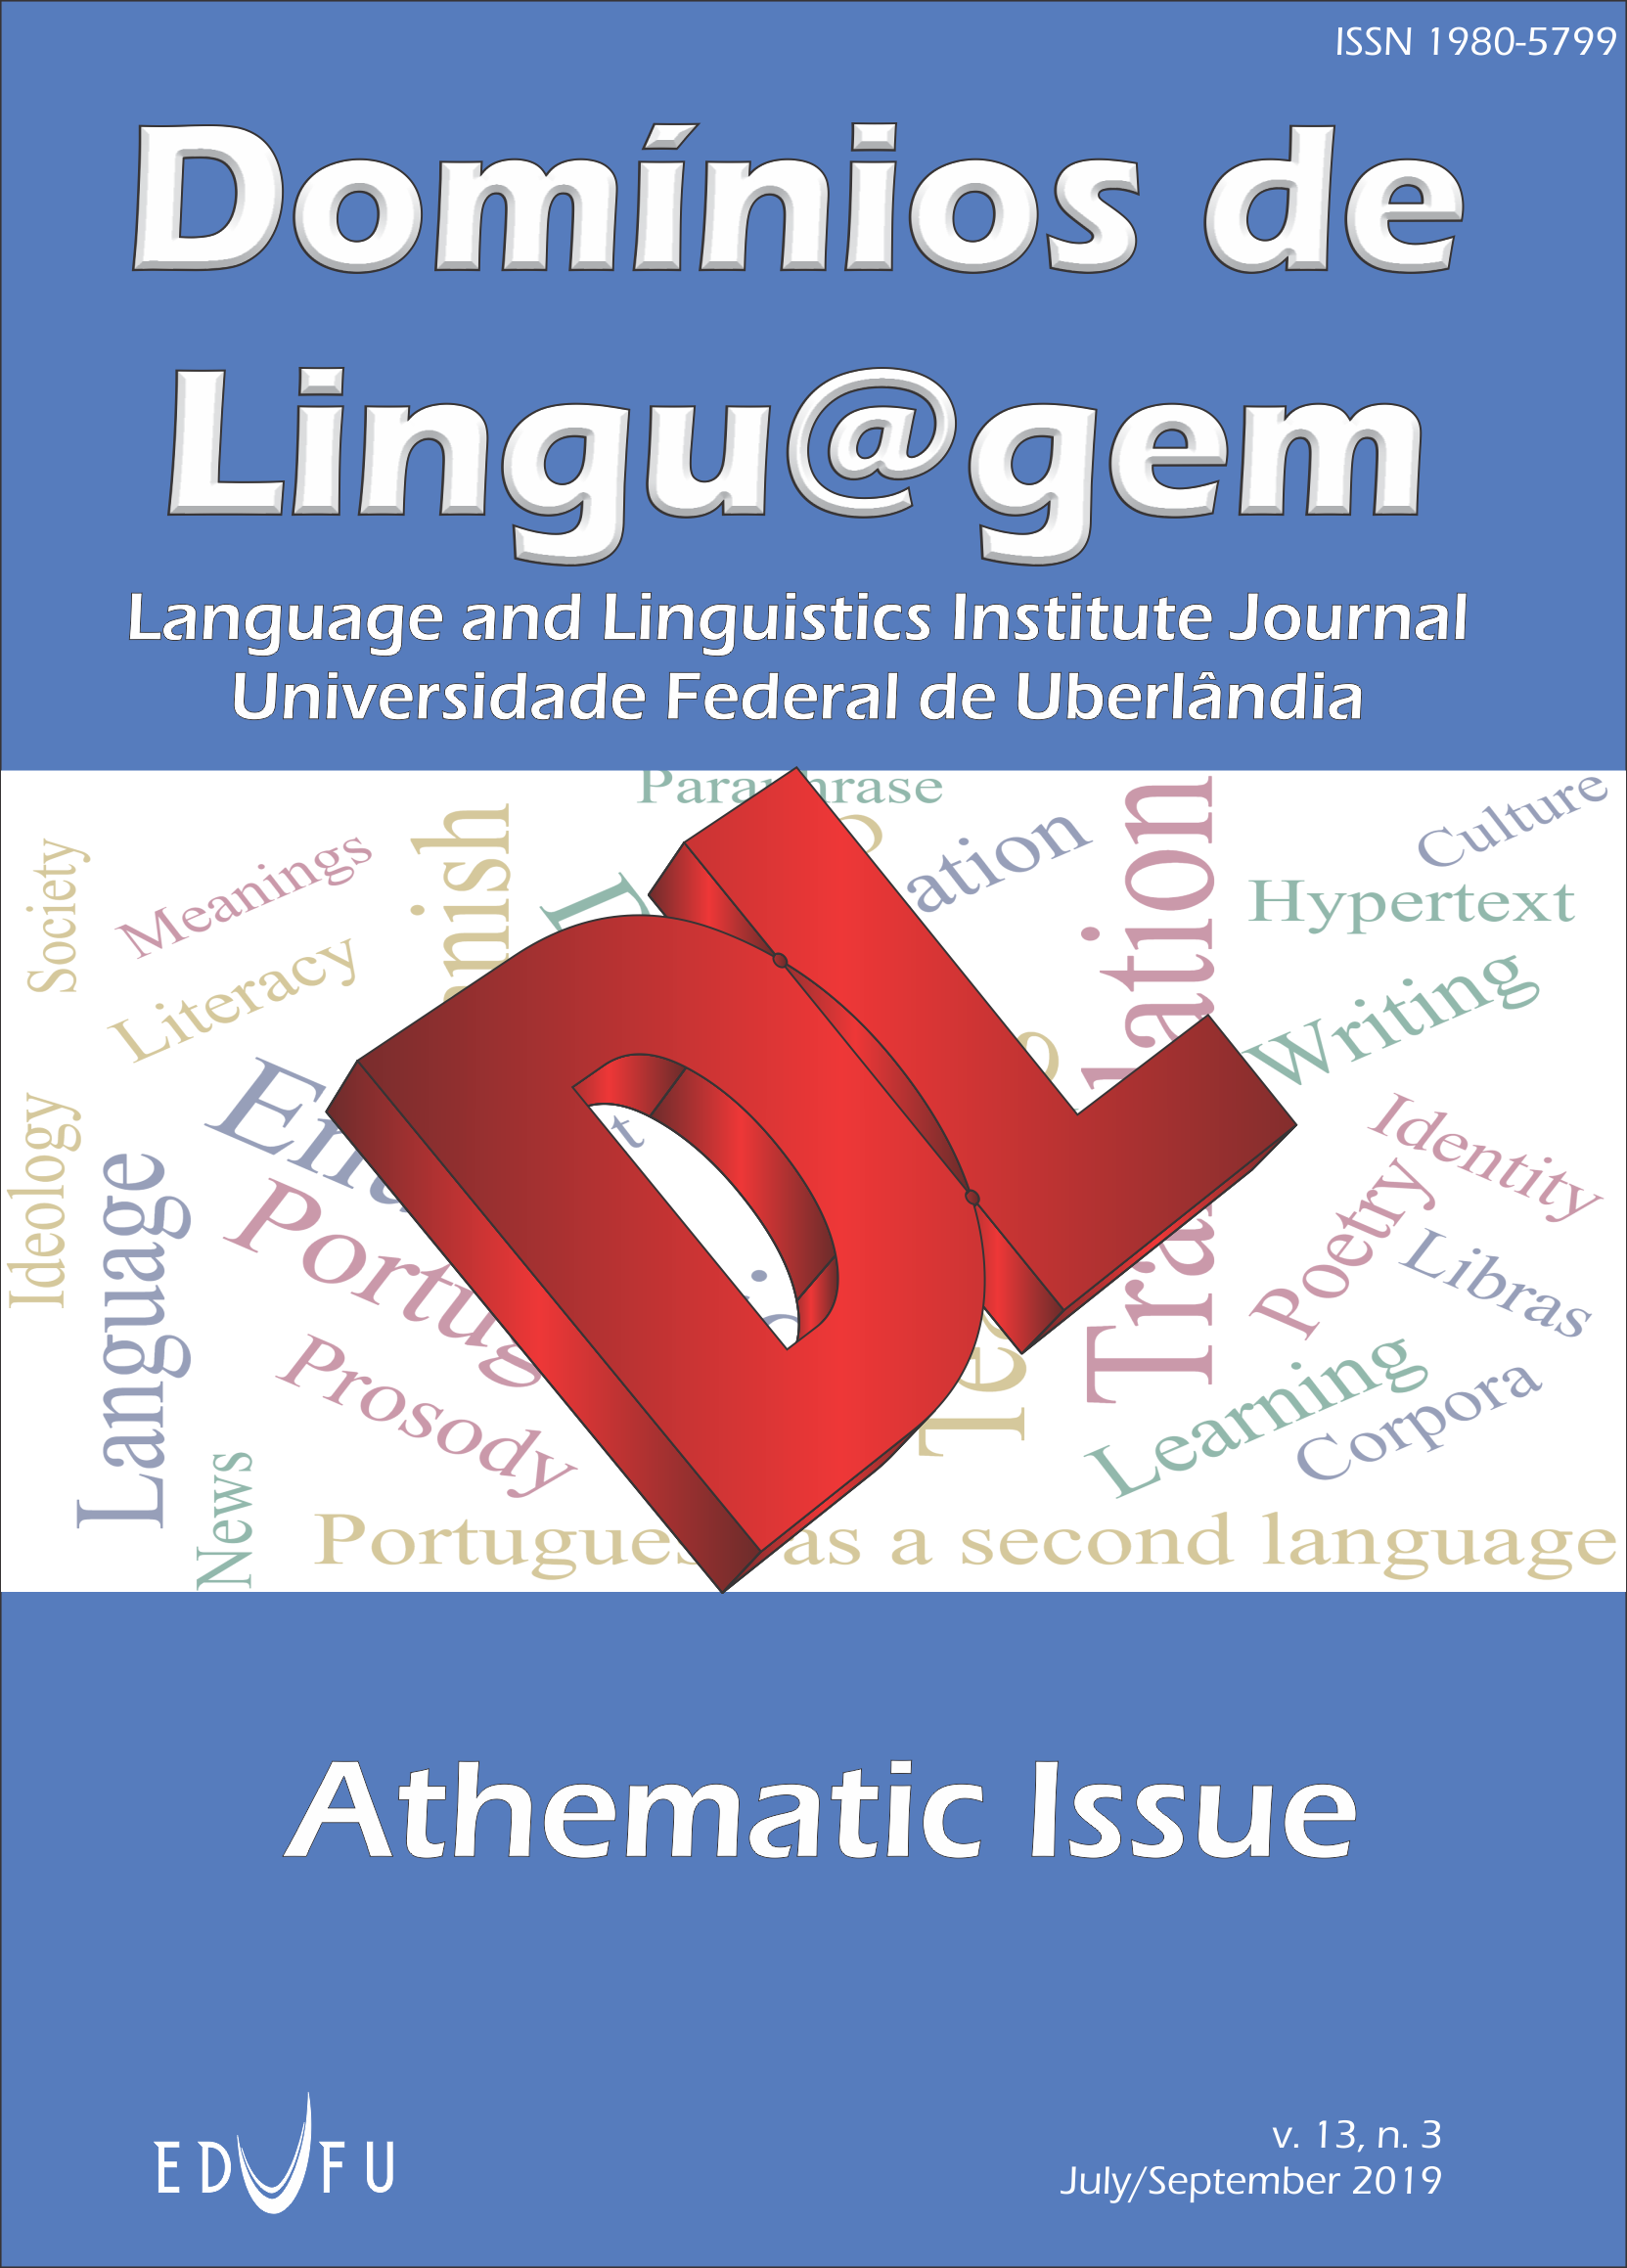 Athematic issue - July/September 2019